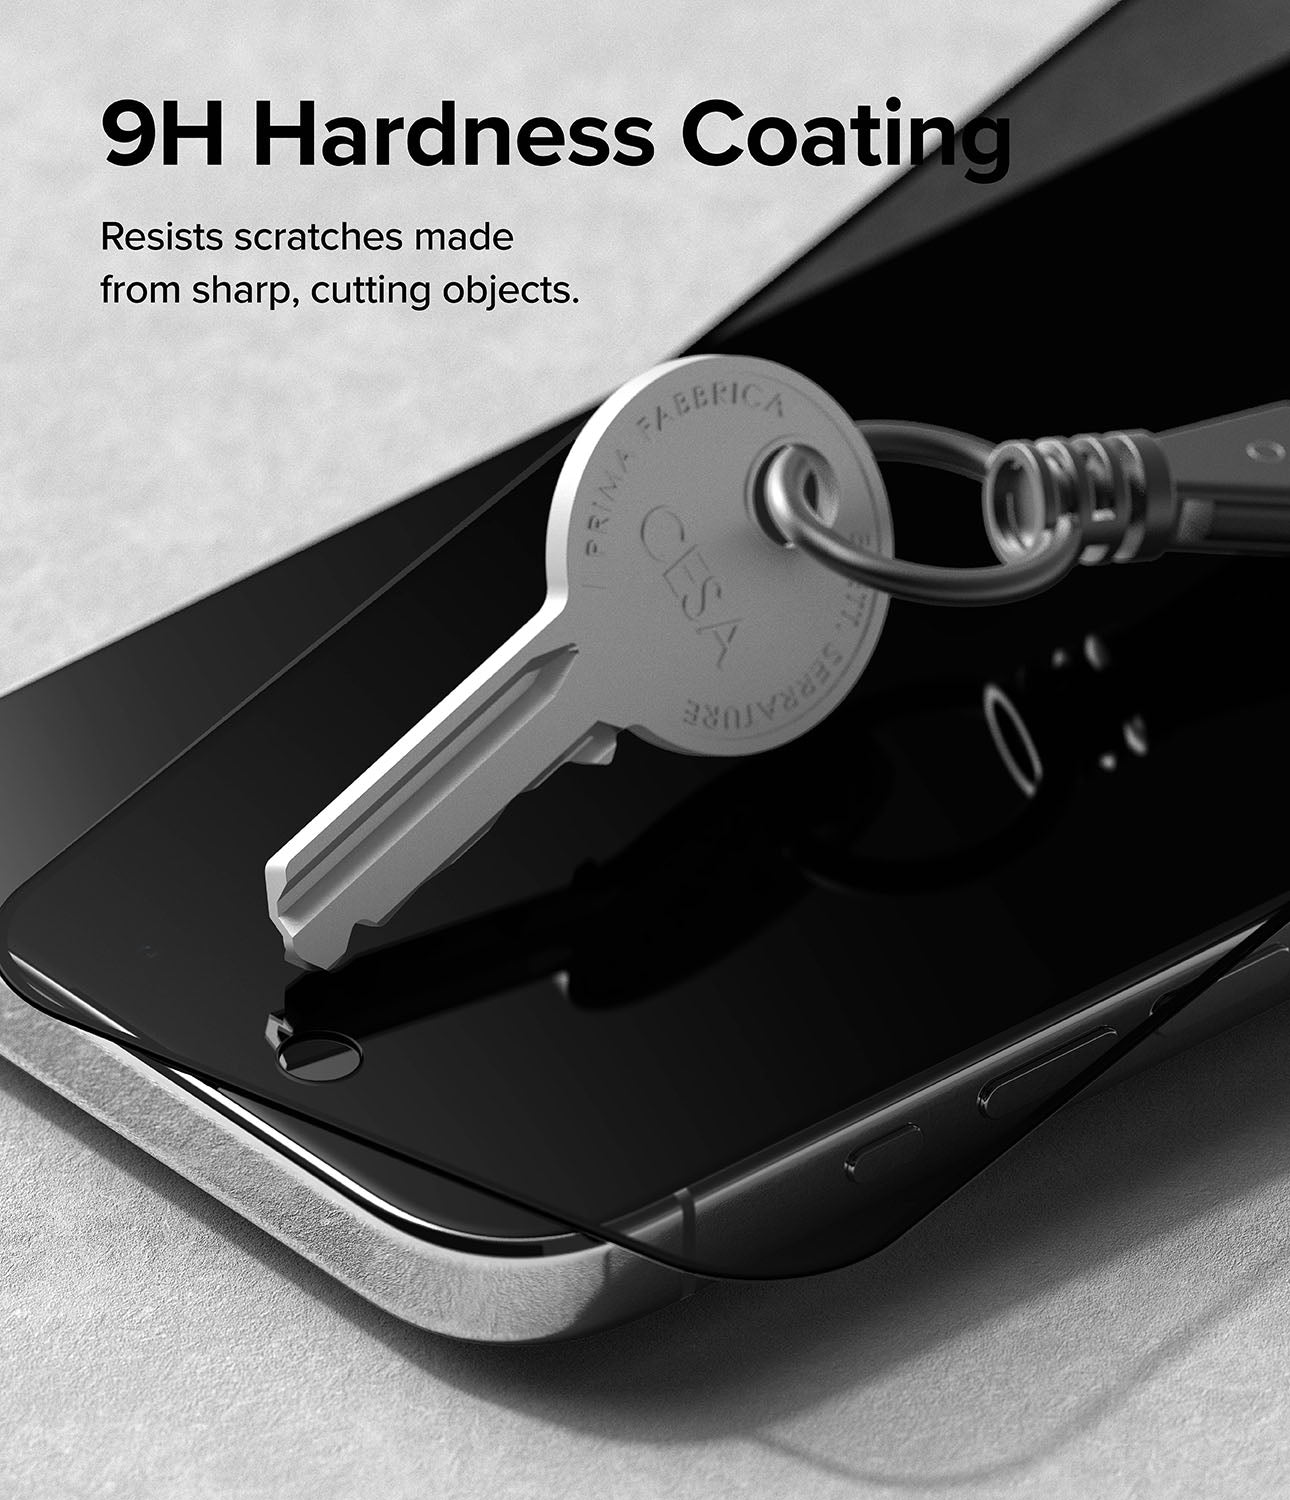 iPhone 15 Pro Max Screen Protector | Privacy Glass - 9H Hardness Coating. Resists scratches made from sharp, cutting objects.